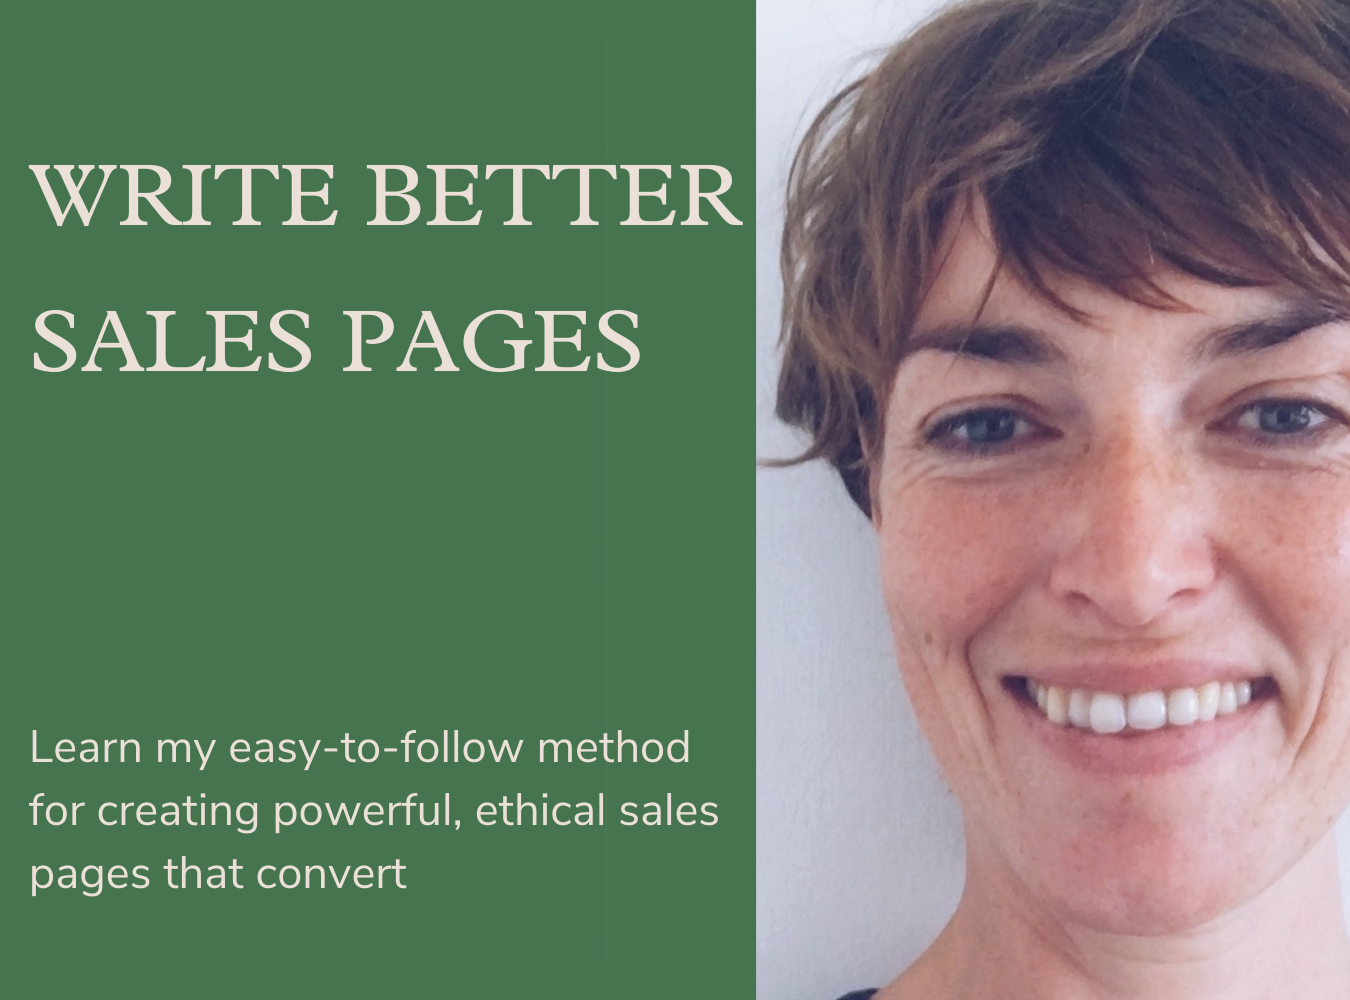 Write better sales pages